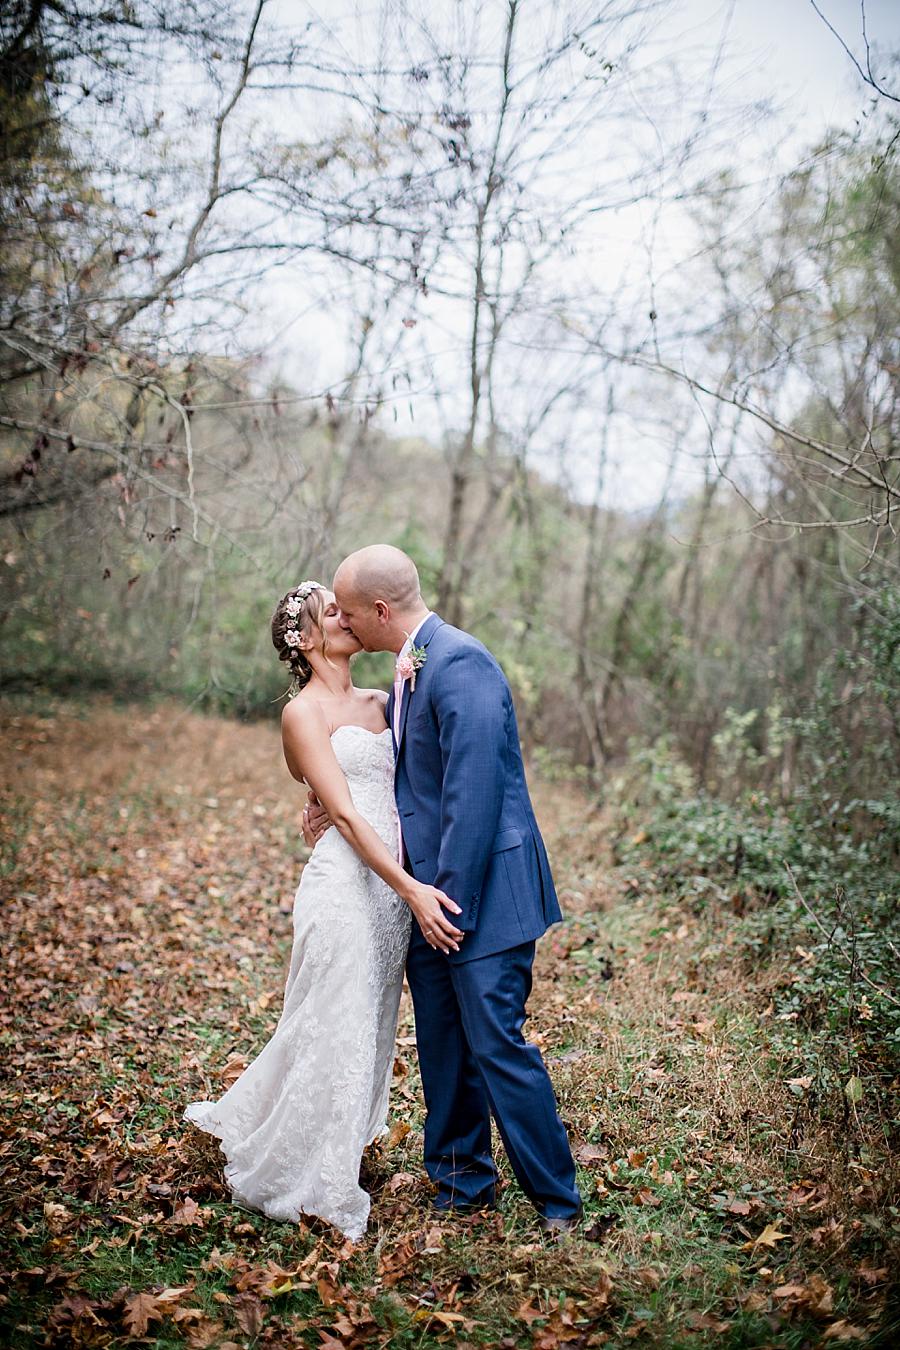 Groom kissing his Bride at this Alpine Village Wedding Chapel by Knoxville Wedding Photographer, Amanda May Photos.